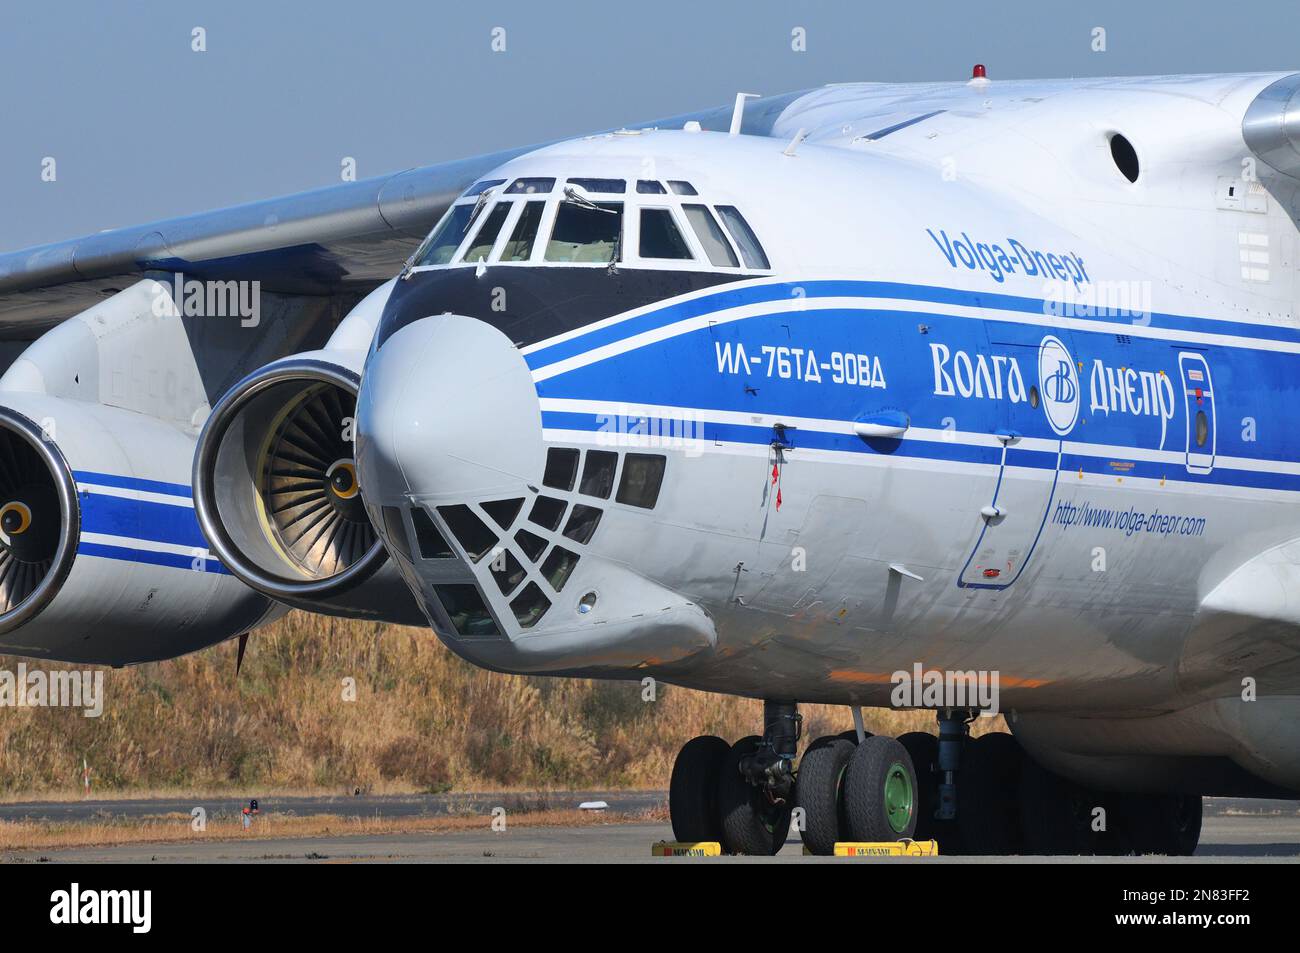 Tokyo, Japan - December 01, 2013: Volga-Dnepr Airlines Ilyushin IL76-90VD Candid strategic and tactical airlifter. Stock Photo